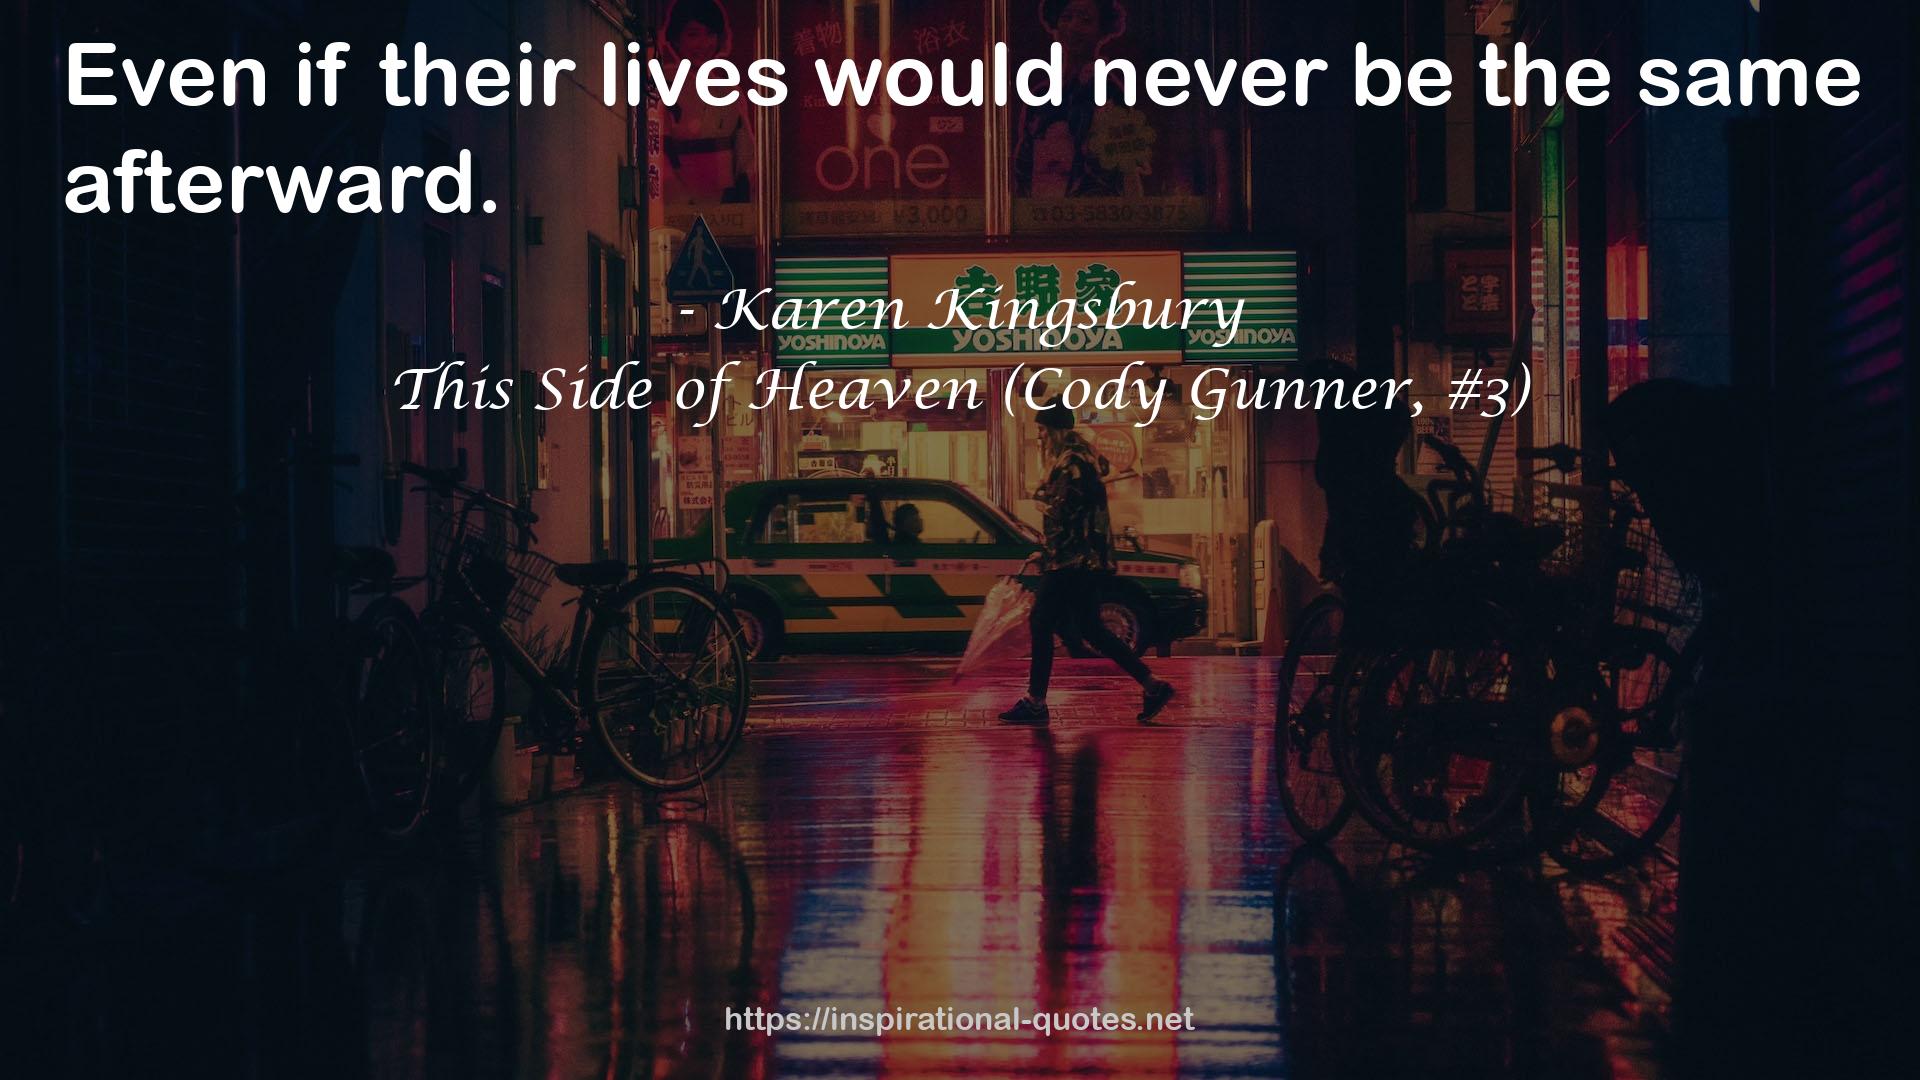 This Side of Heaven (Cody Gunner, #3) QUOTES